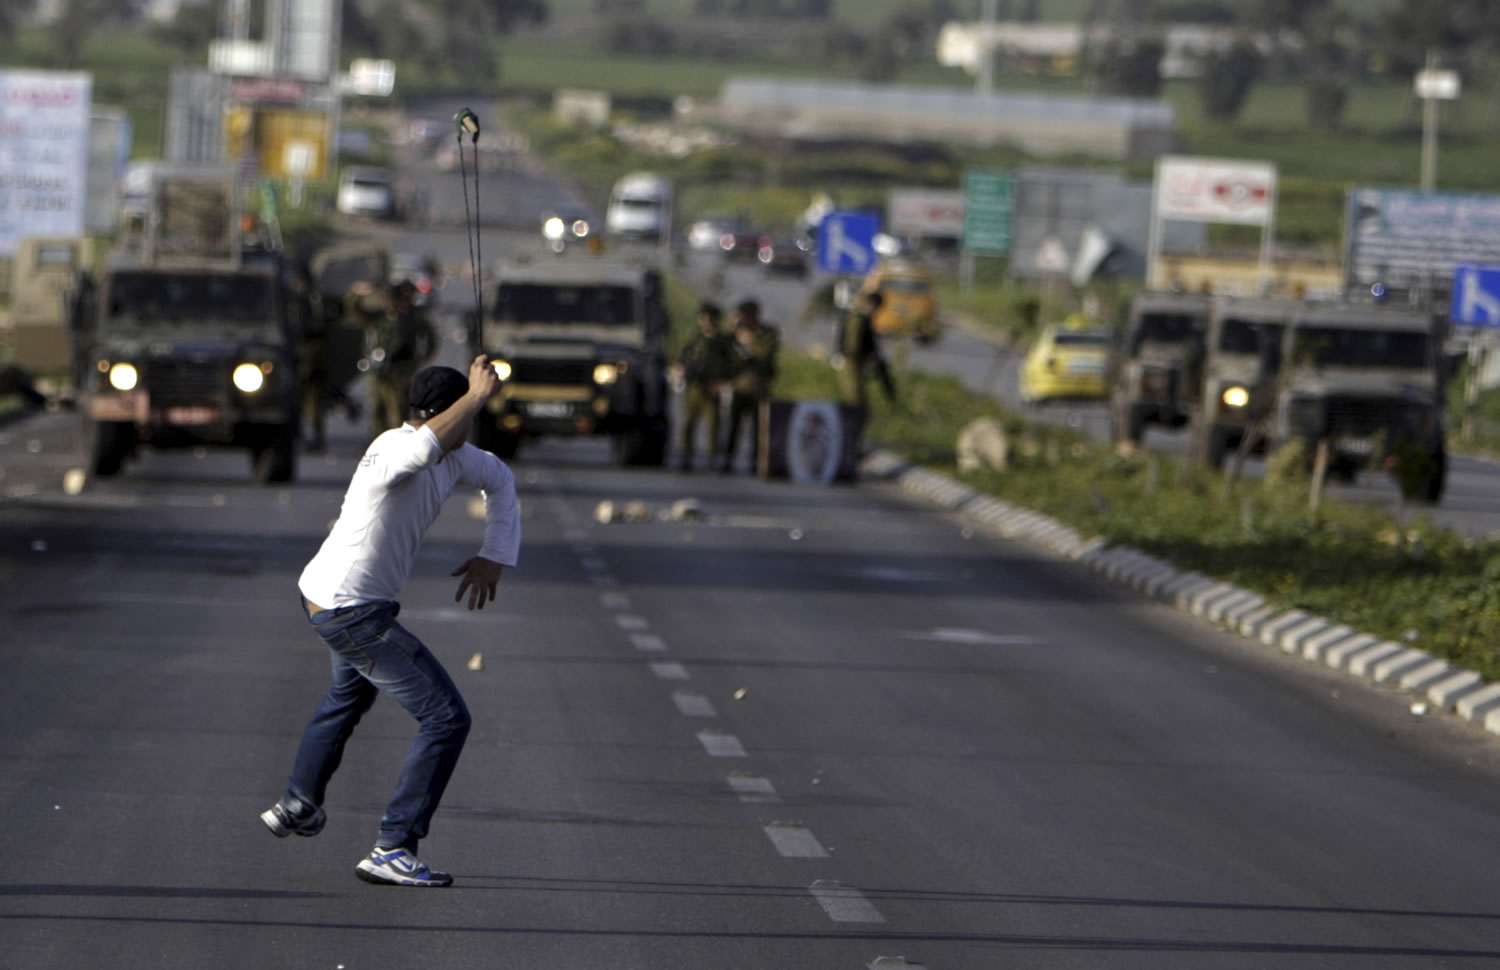 A Palestinian man throws stones Sunday at Israeli soldiers during clashes north of the West Bank city of Jenin that followed a rally in support of the Palestinian prisoners in Israeli jails.